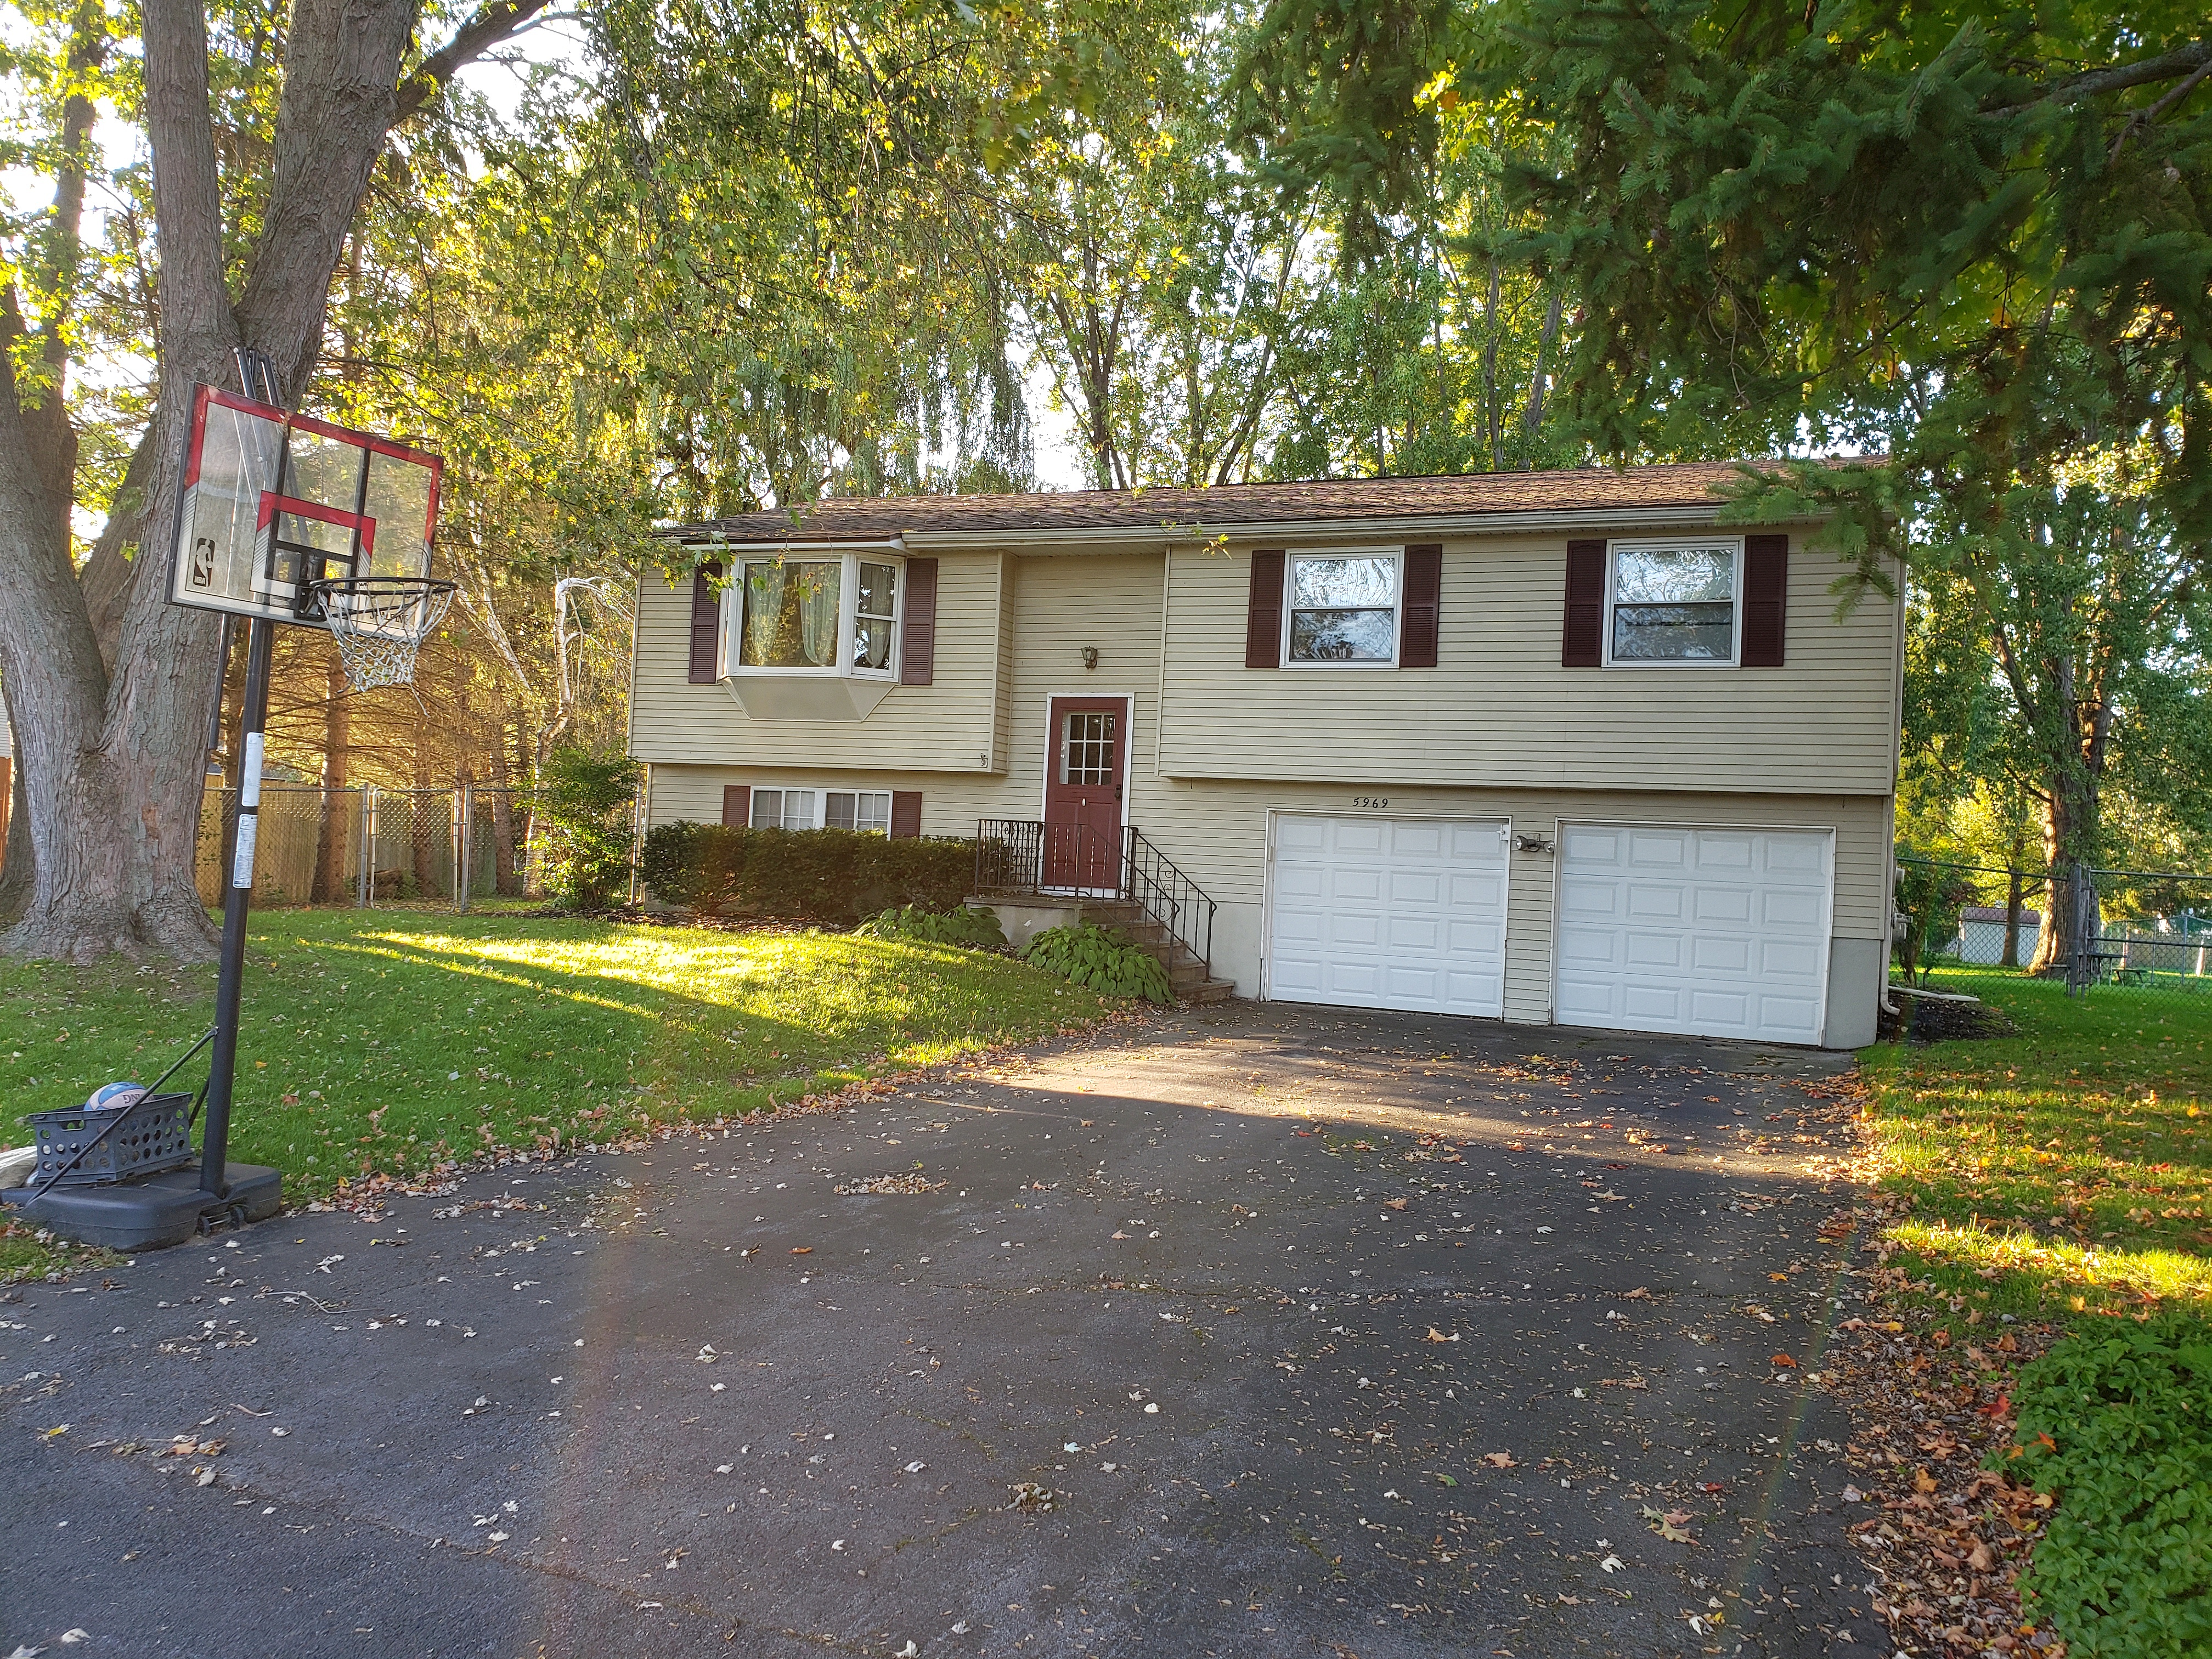 3 Bedrooms / 2.5 Bathrooms - Est. $1,067.00 / Month* for rent in Cicero, NY